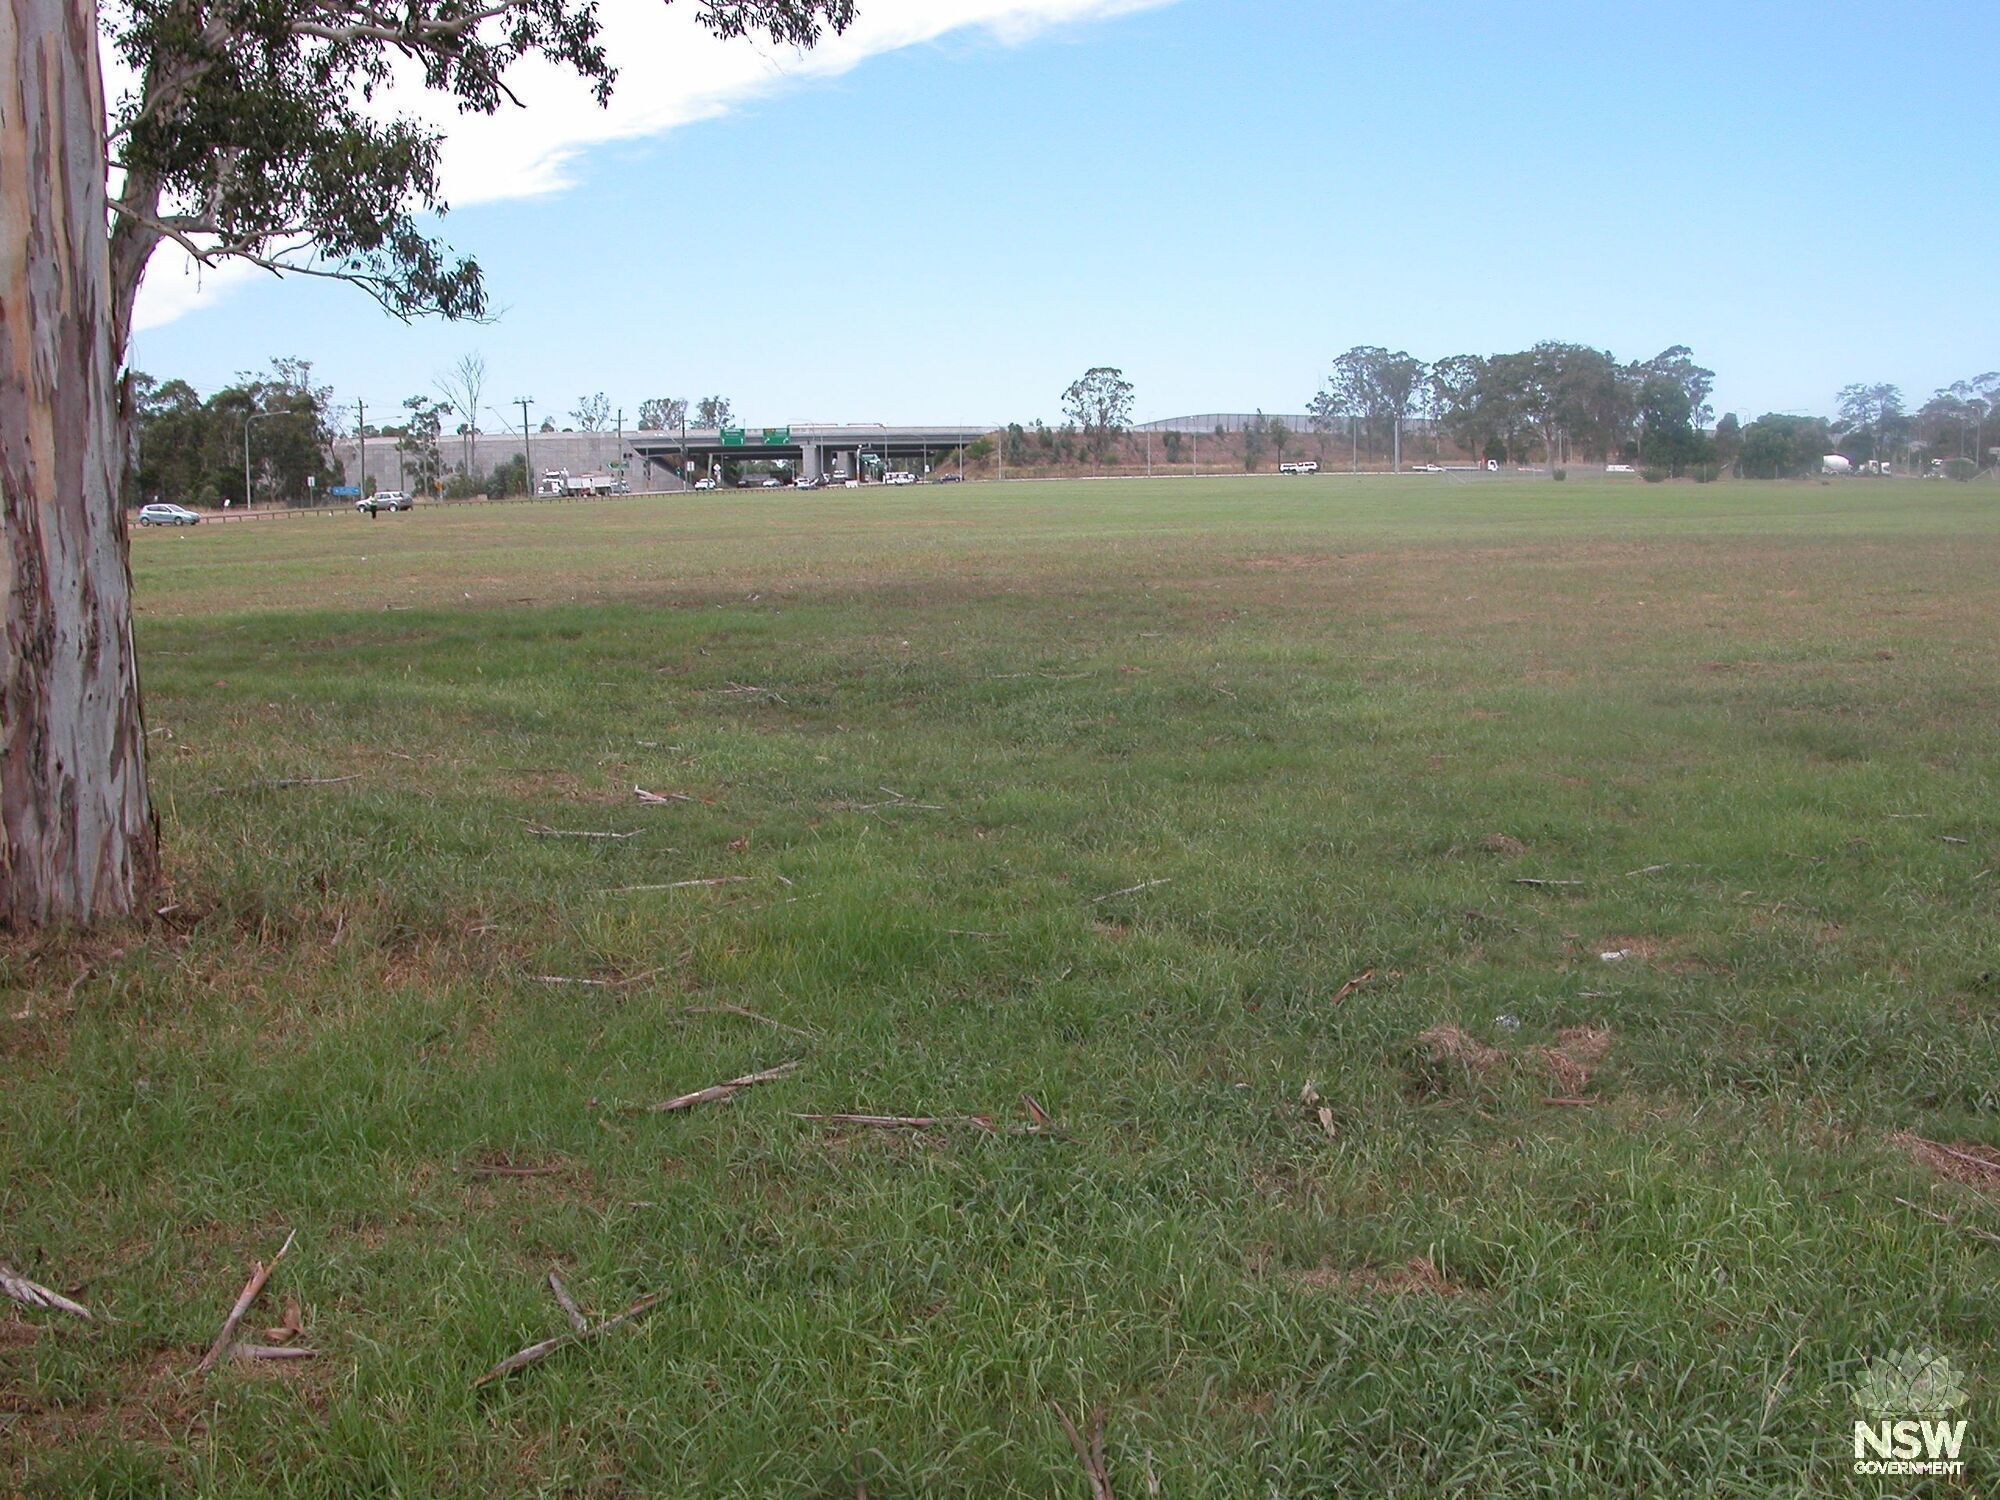 Blacktown Native Institute Site - looking south across the site toward the corner of Richmond and Rooty Hill Roads.